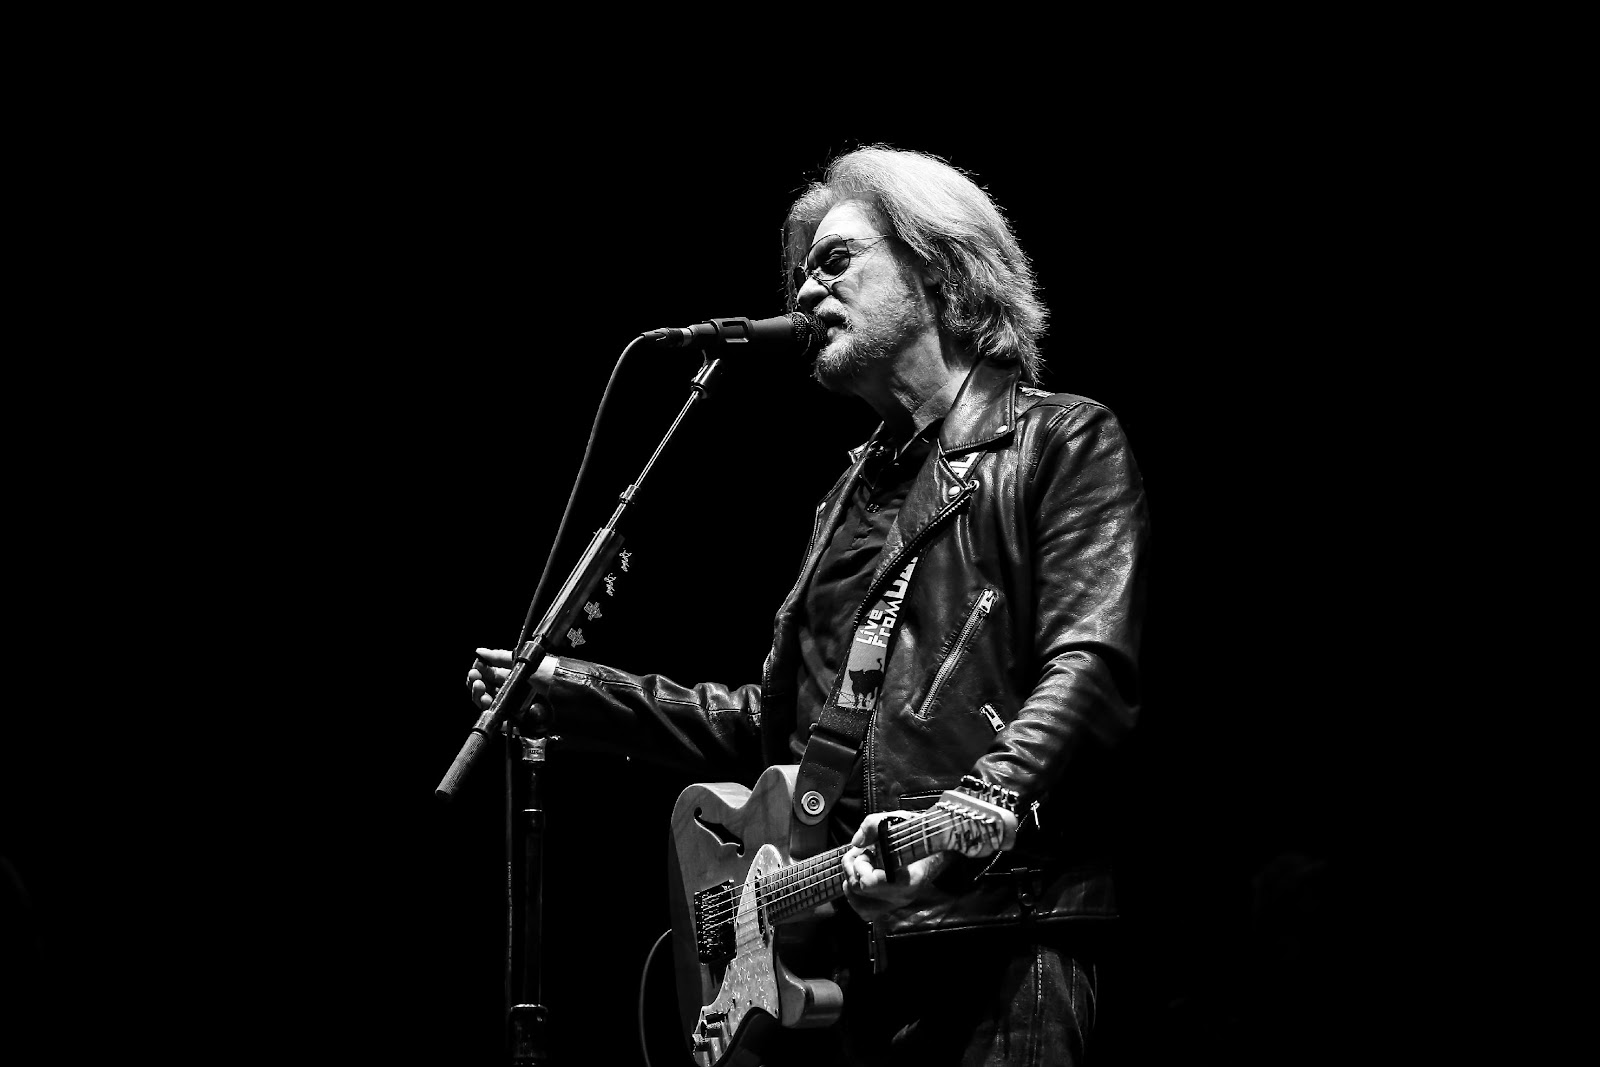 DARYL HALL AND TODD RUNDGREN TO PERFORM THEIR CLASSIC HITS